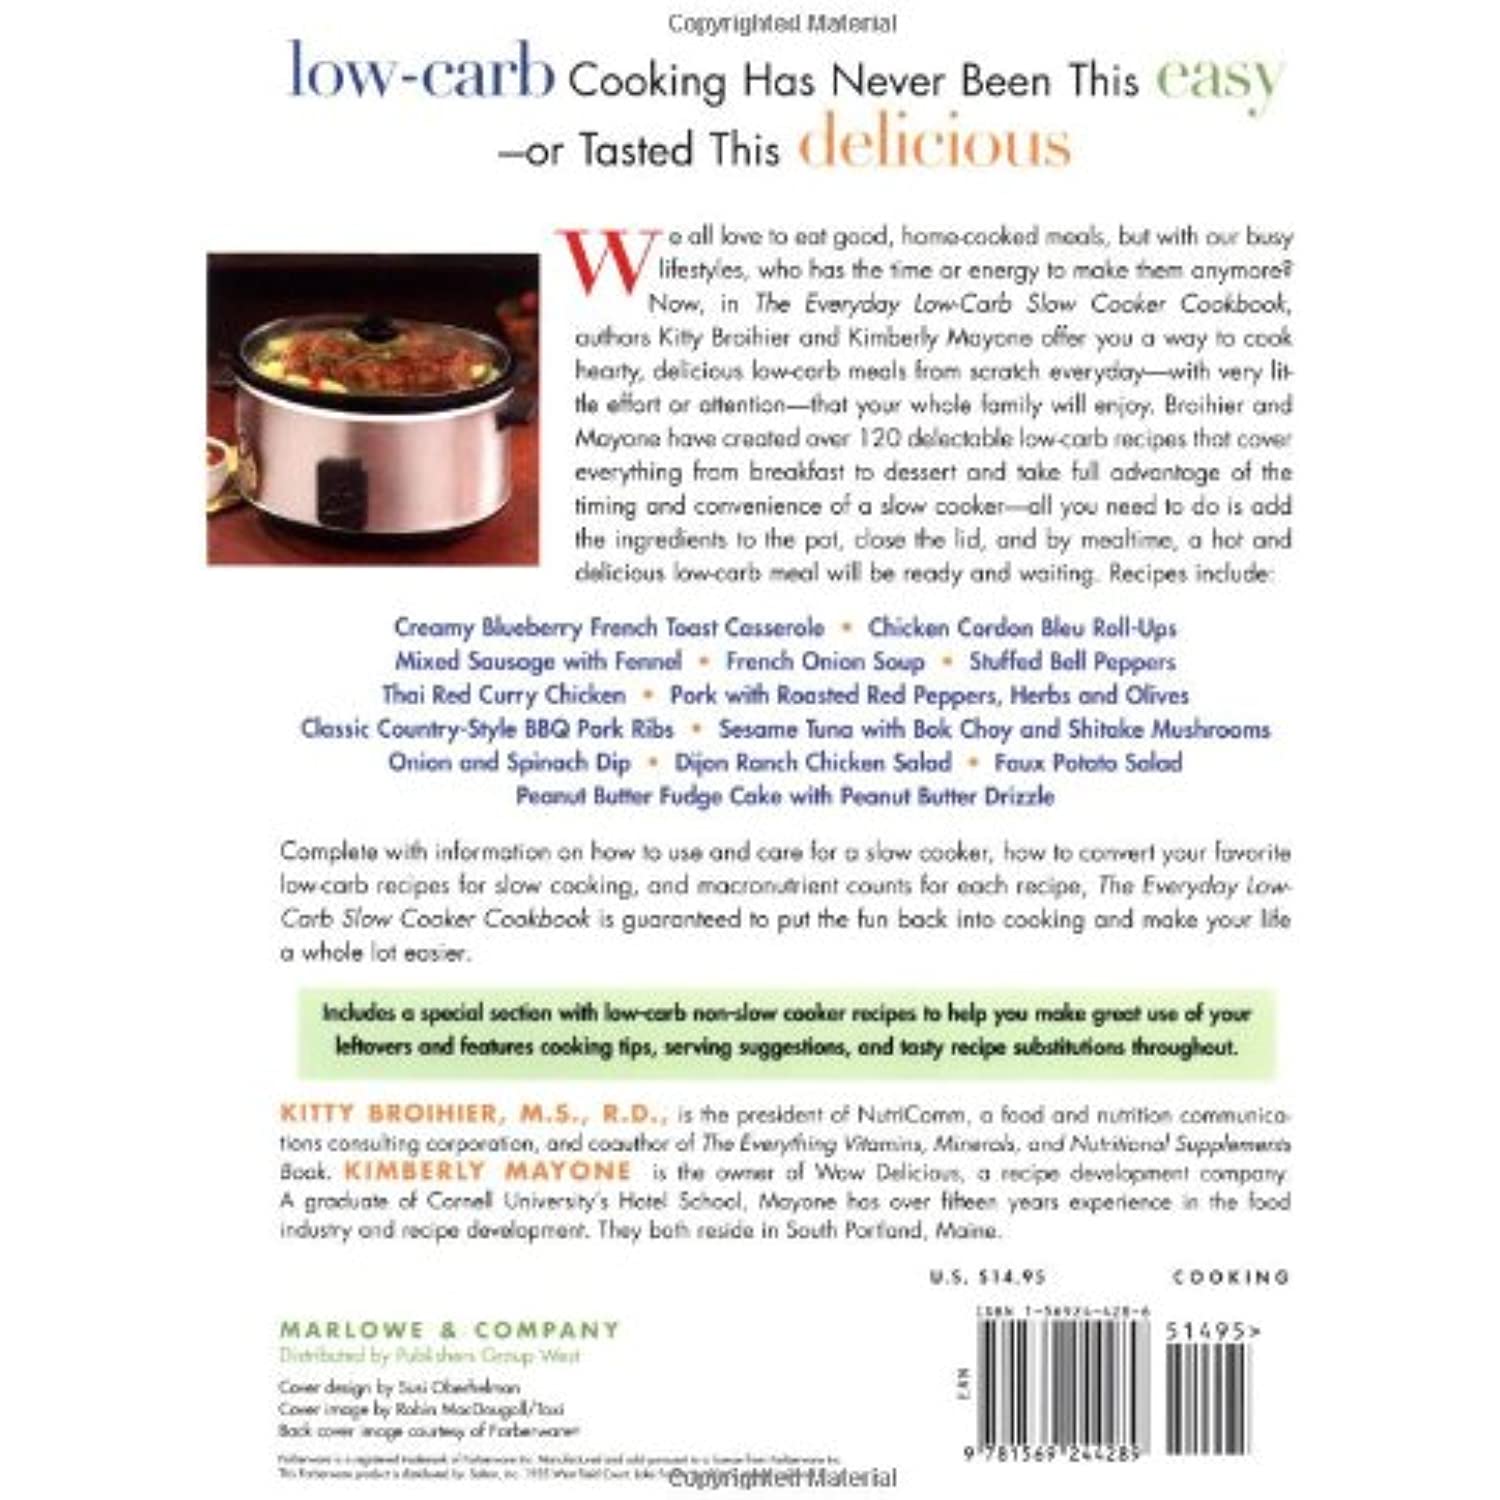 The Everyday Low Carb Slow Cooker Cookbook (Paperback) - image 2 of 3